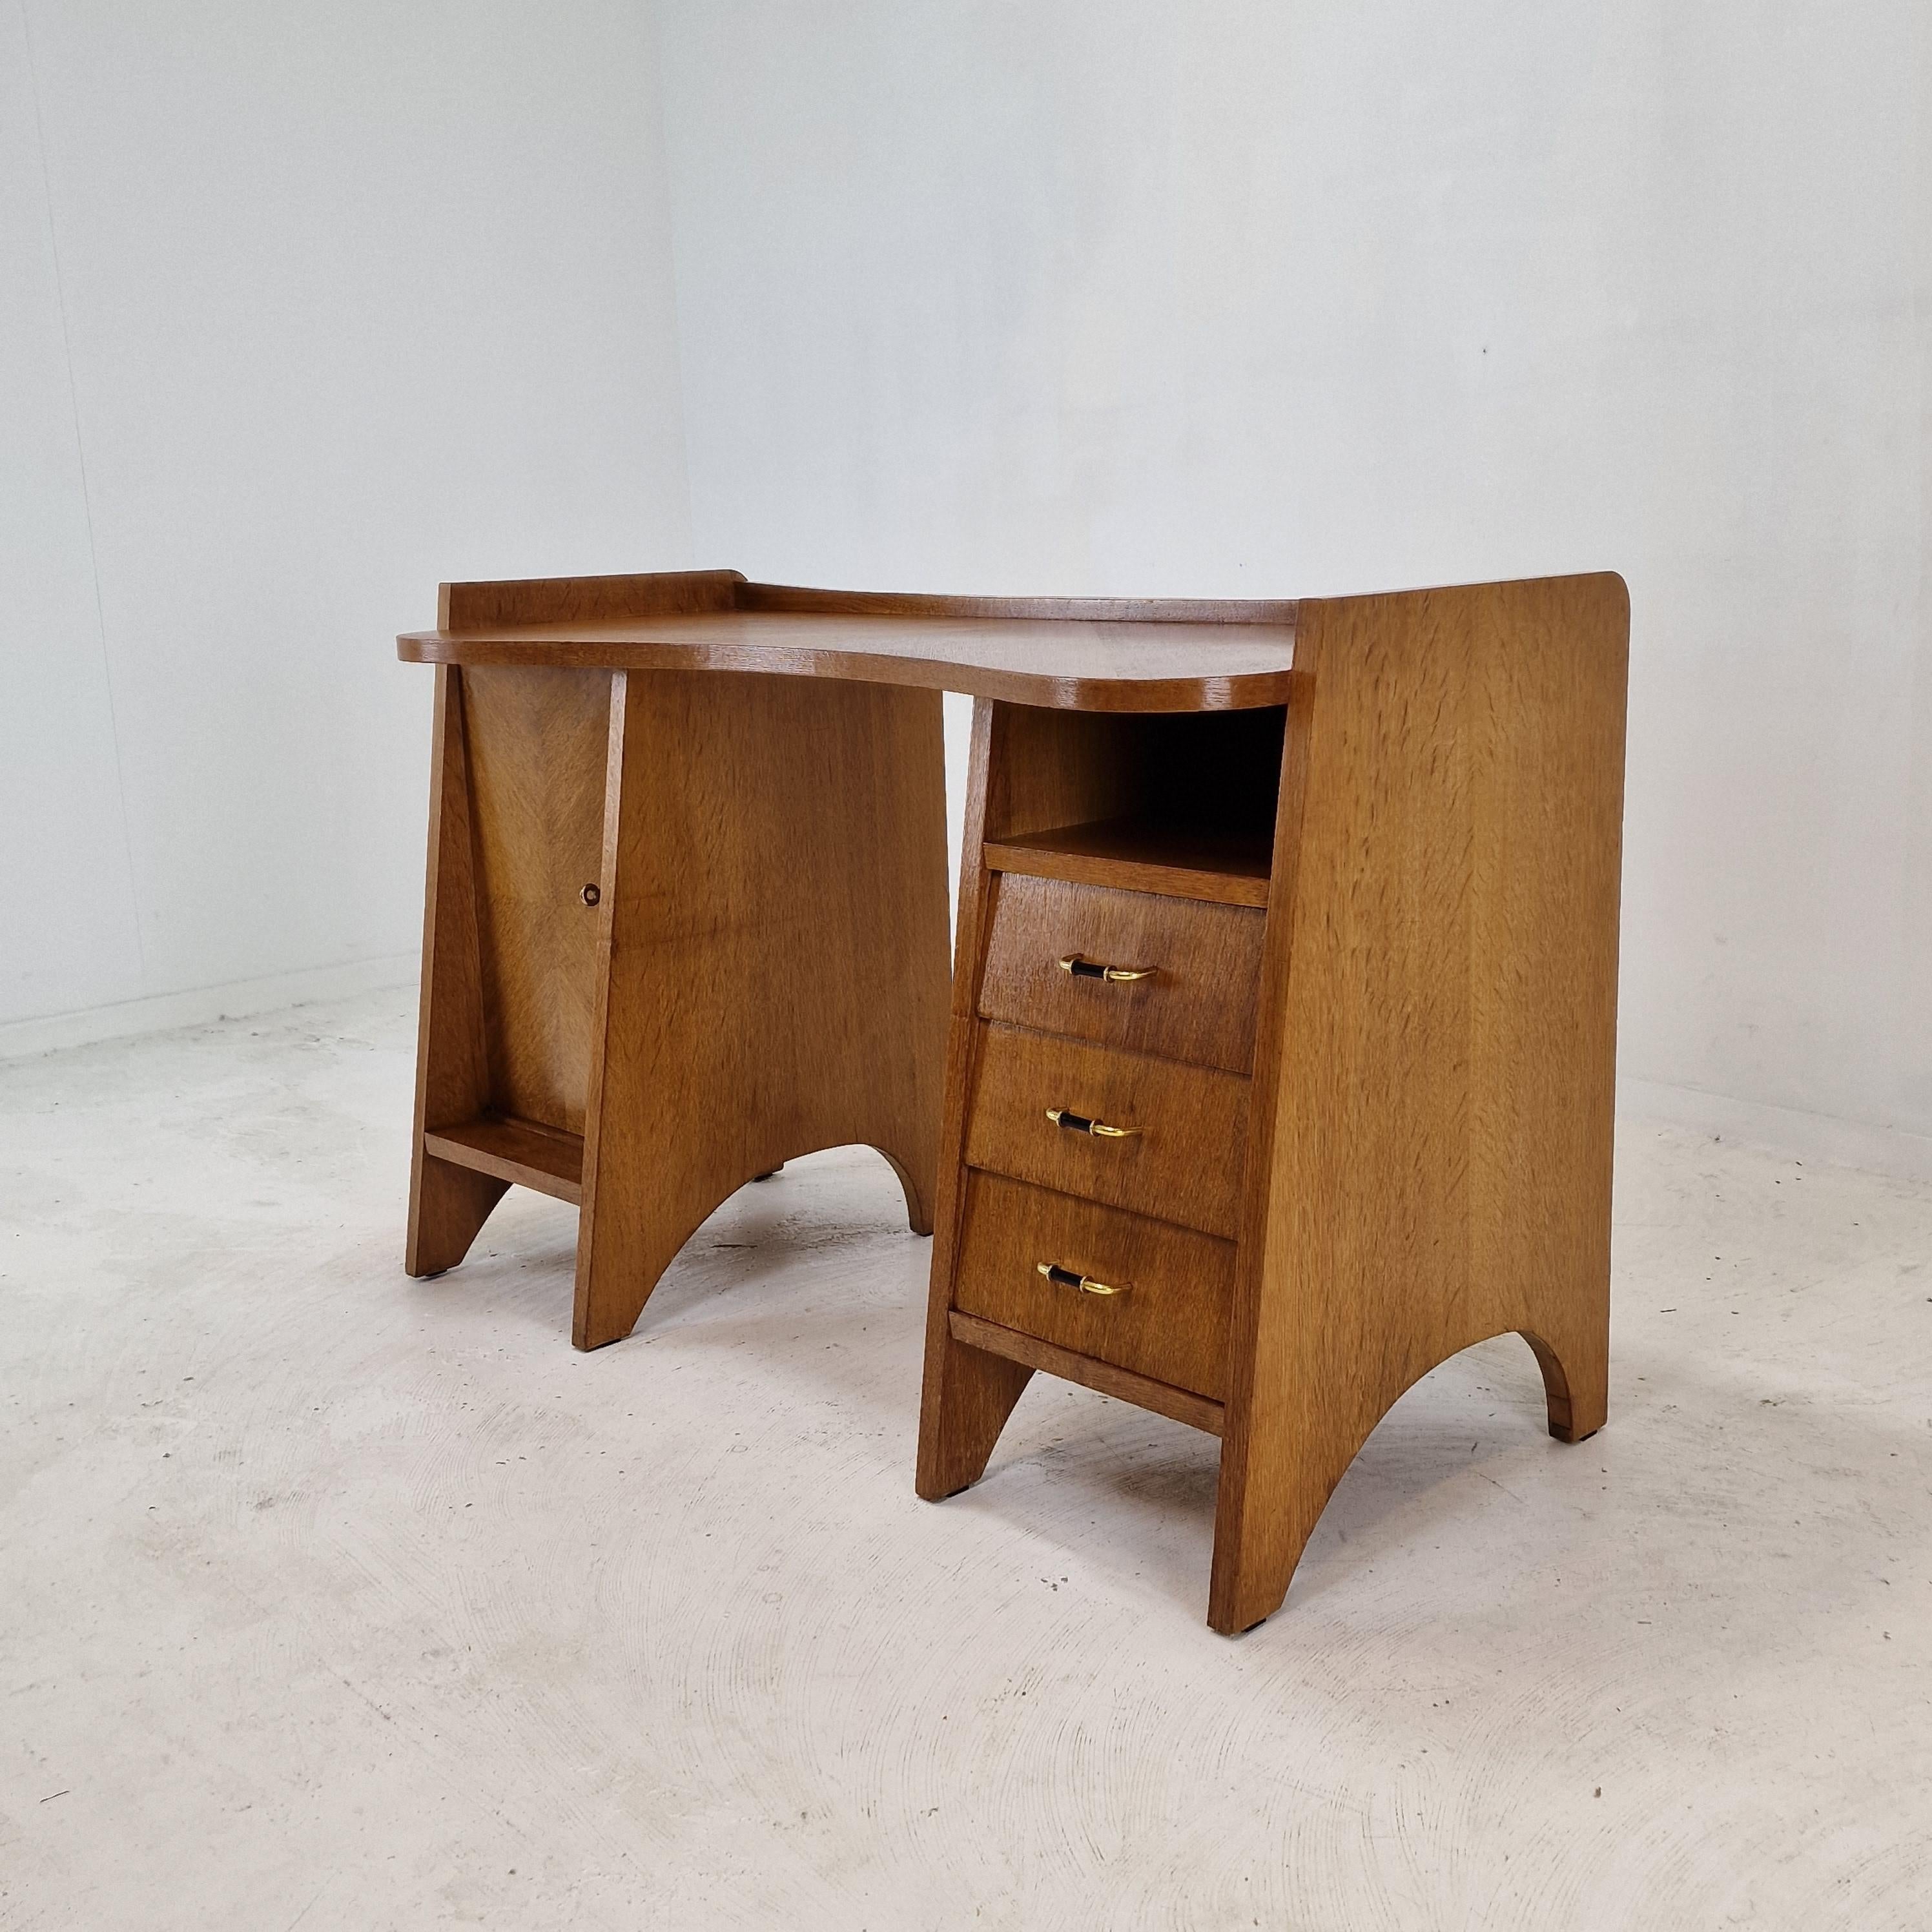 Beautiful desk, fabricated in Italy in the 1960s. 
This oak wooden desk is made with love and passion by a craftsman as you can see on the details.

The desk can be used as free standing thanks to the very nice finished back side.

On the front